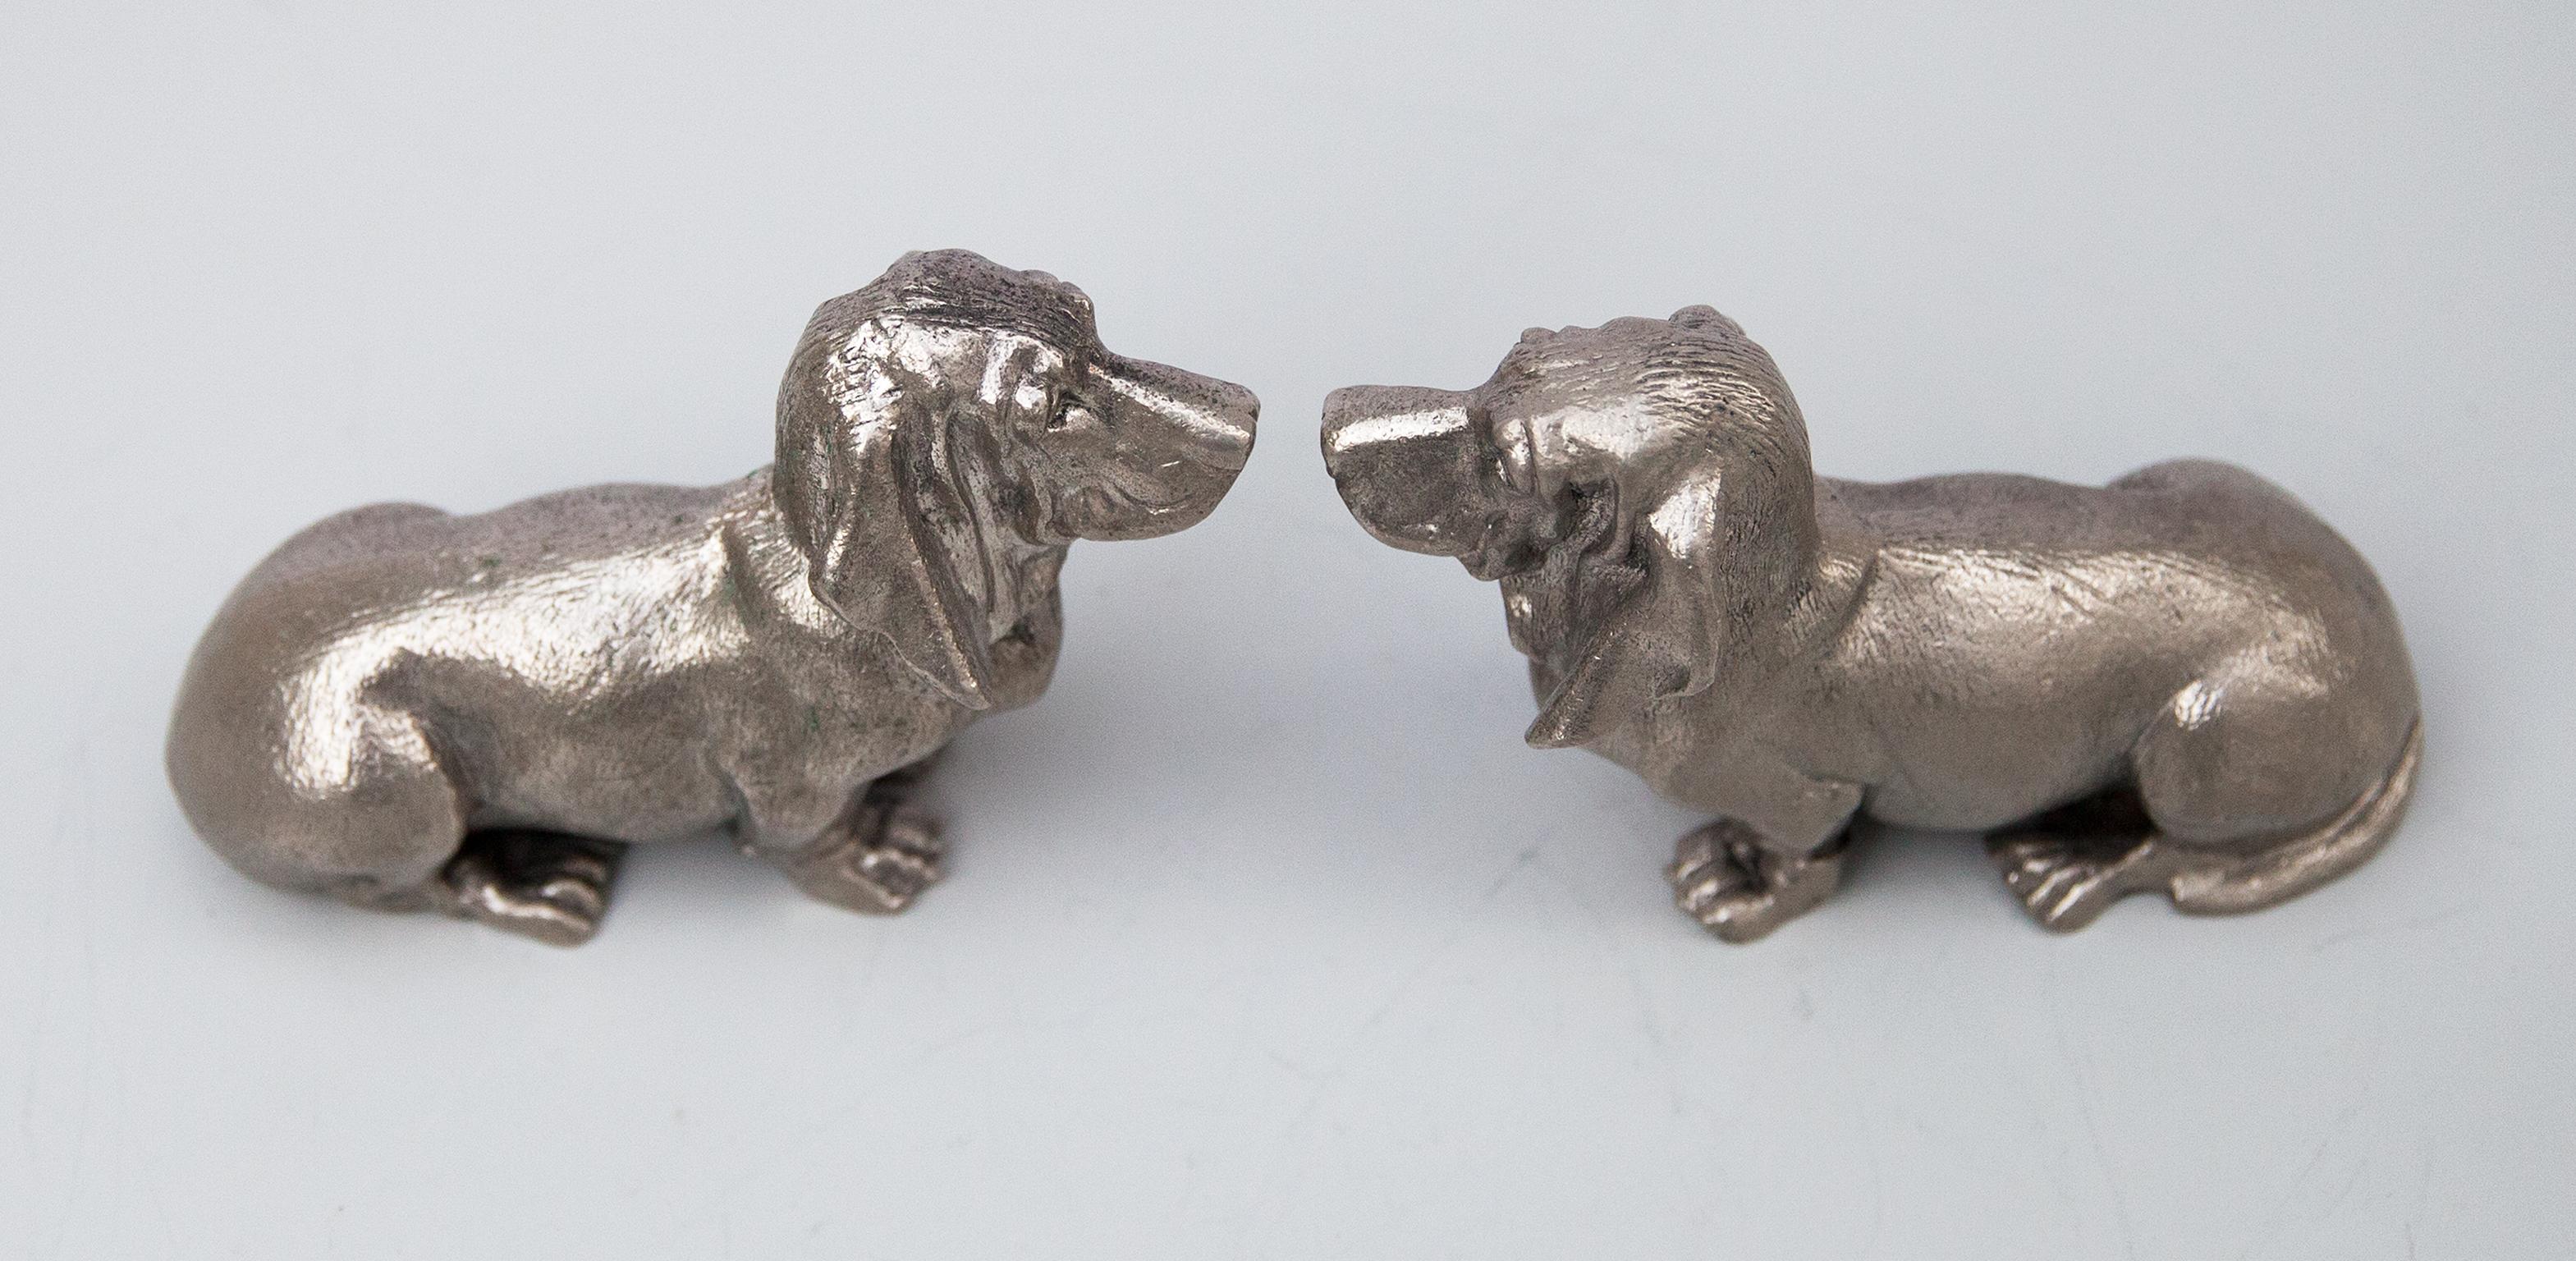 Pair of decorative bassets dogs in silver plated brass, signed Gucci Italy on the bottom.
   